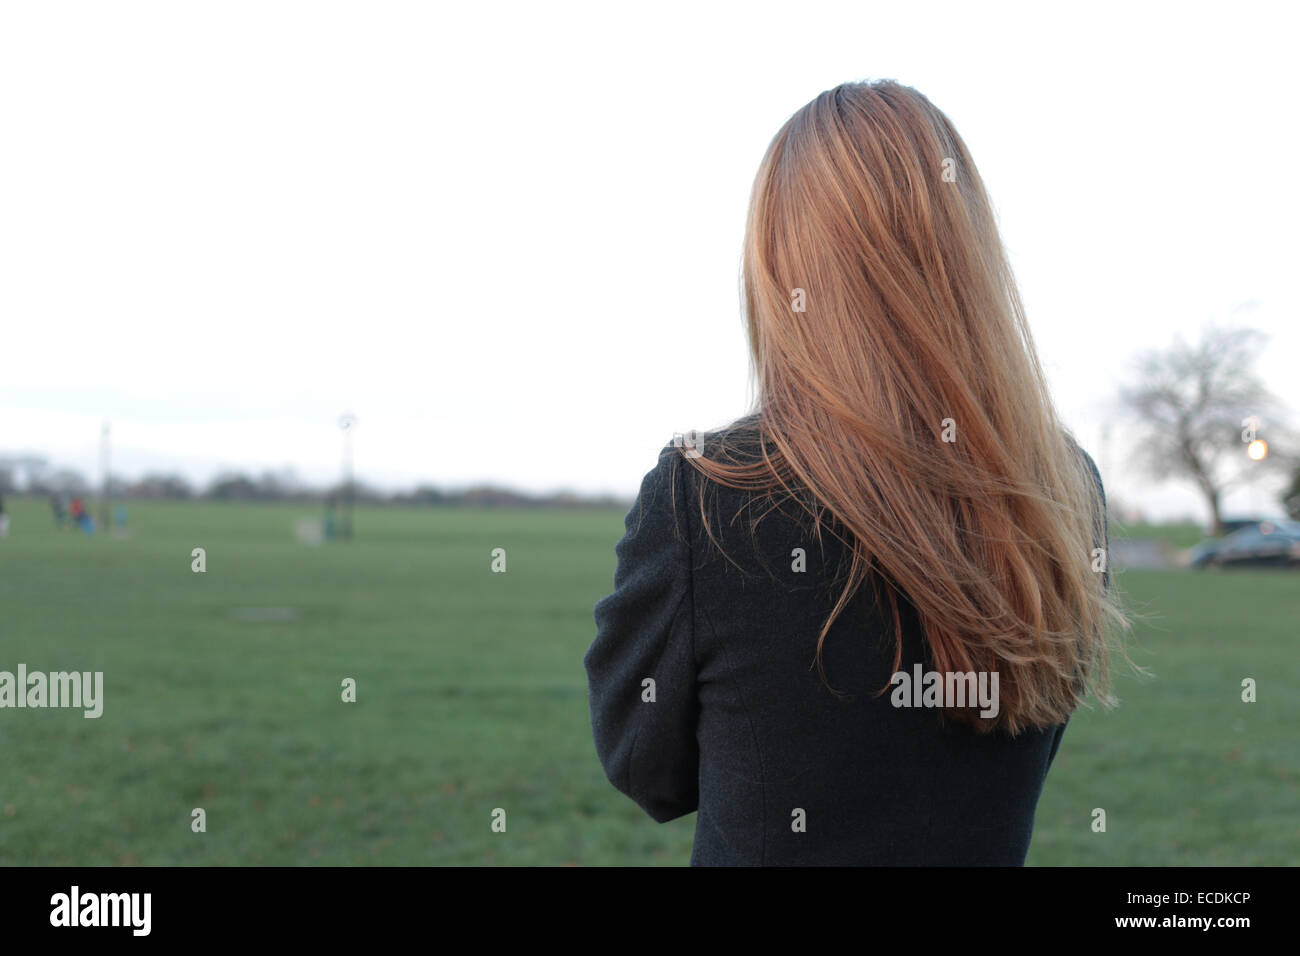 Rear view shot of a young woman standing looking into the distance in a park. Stock Photo